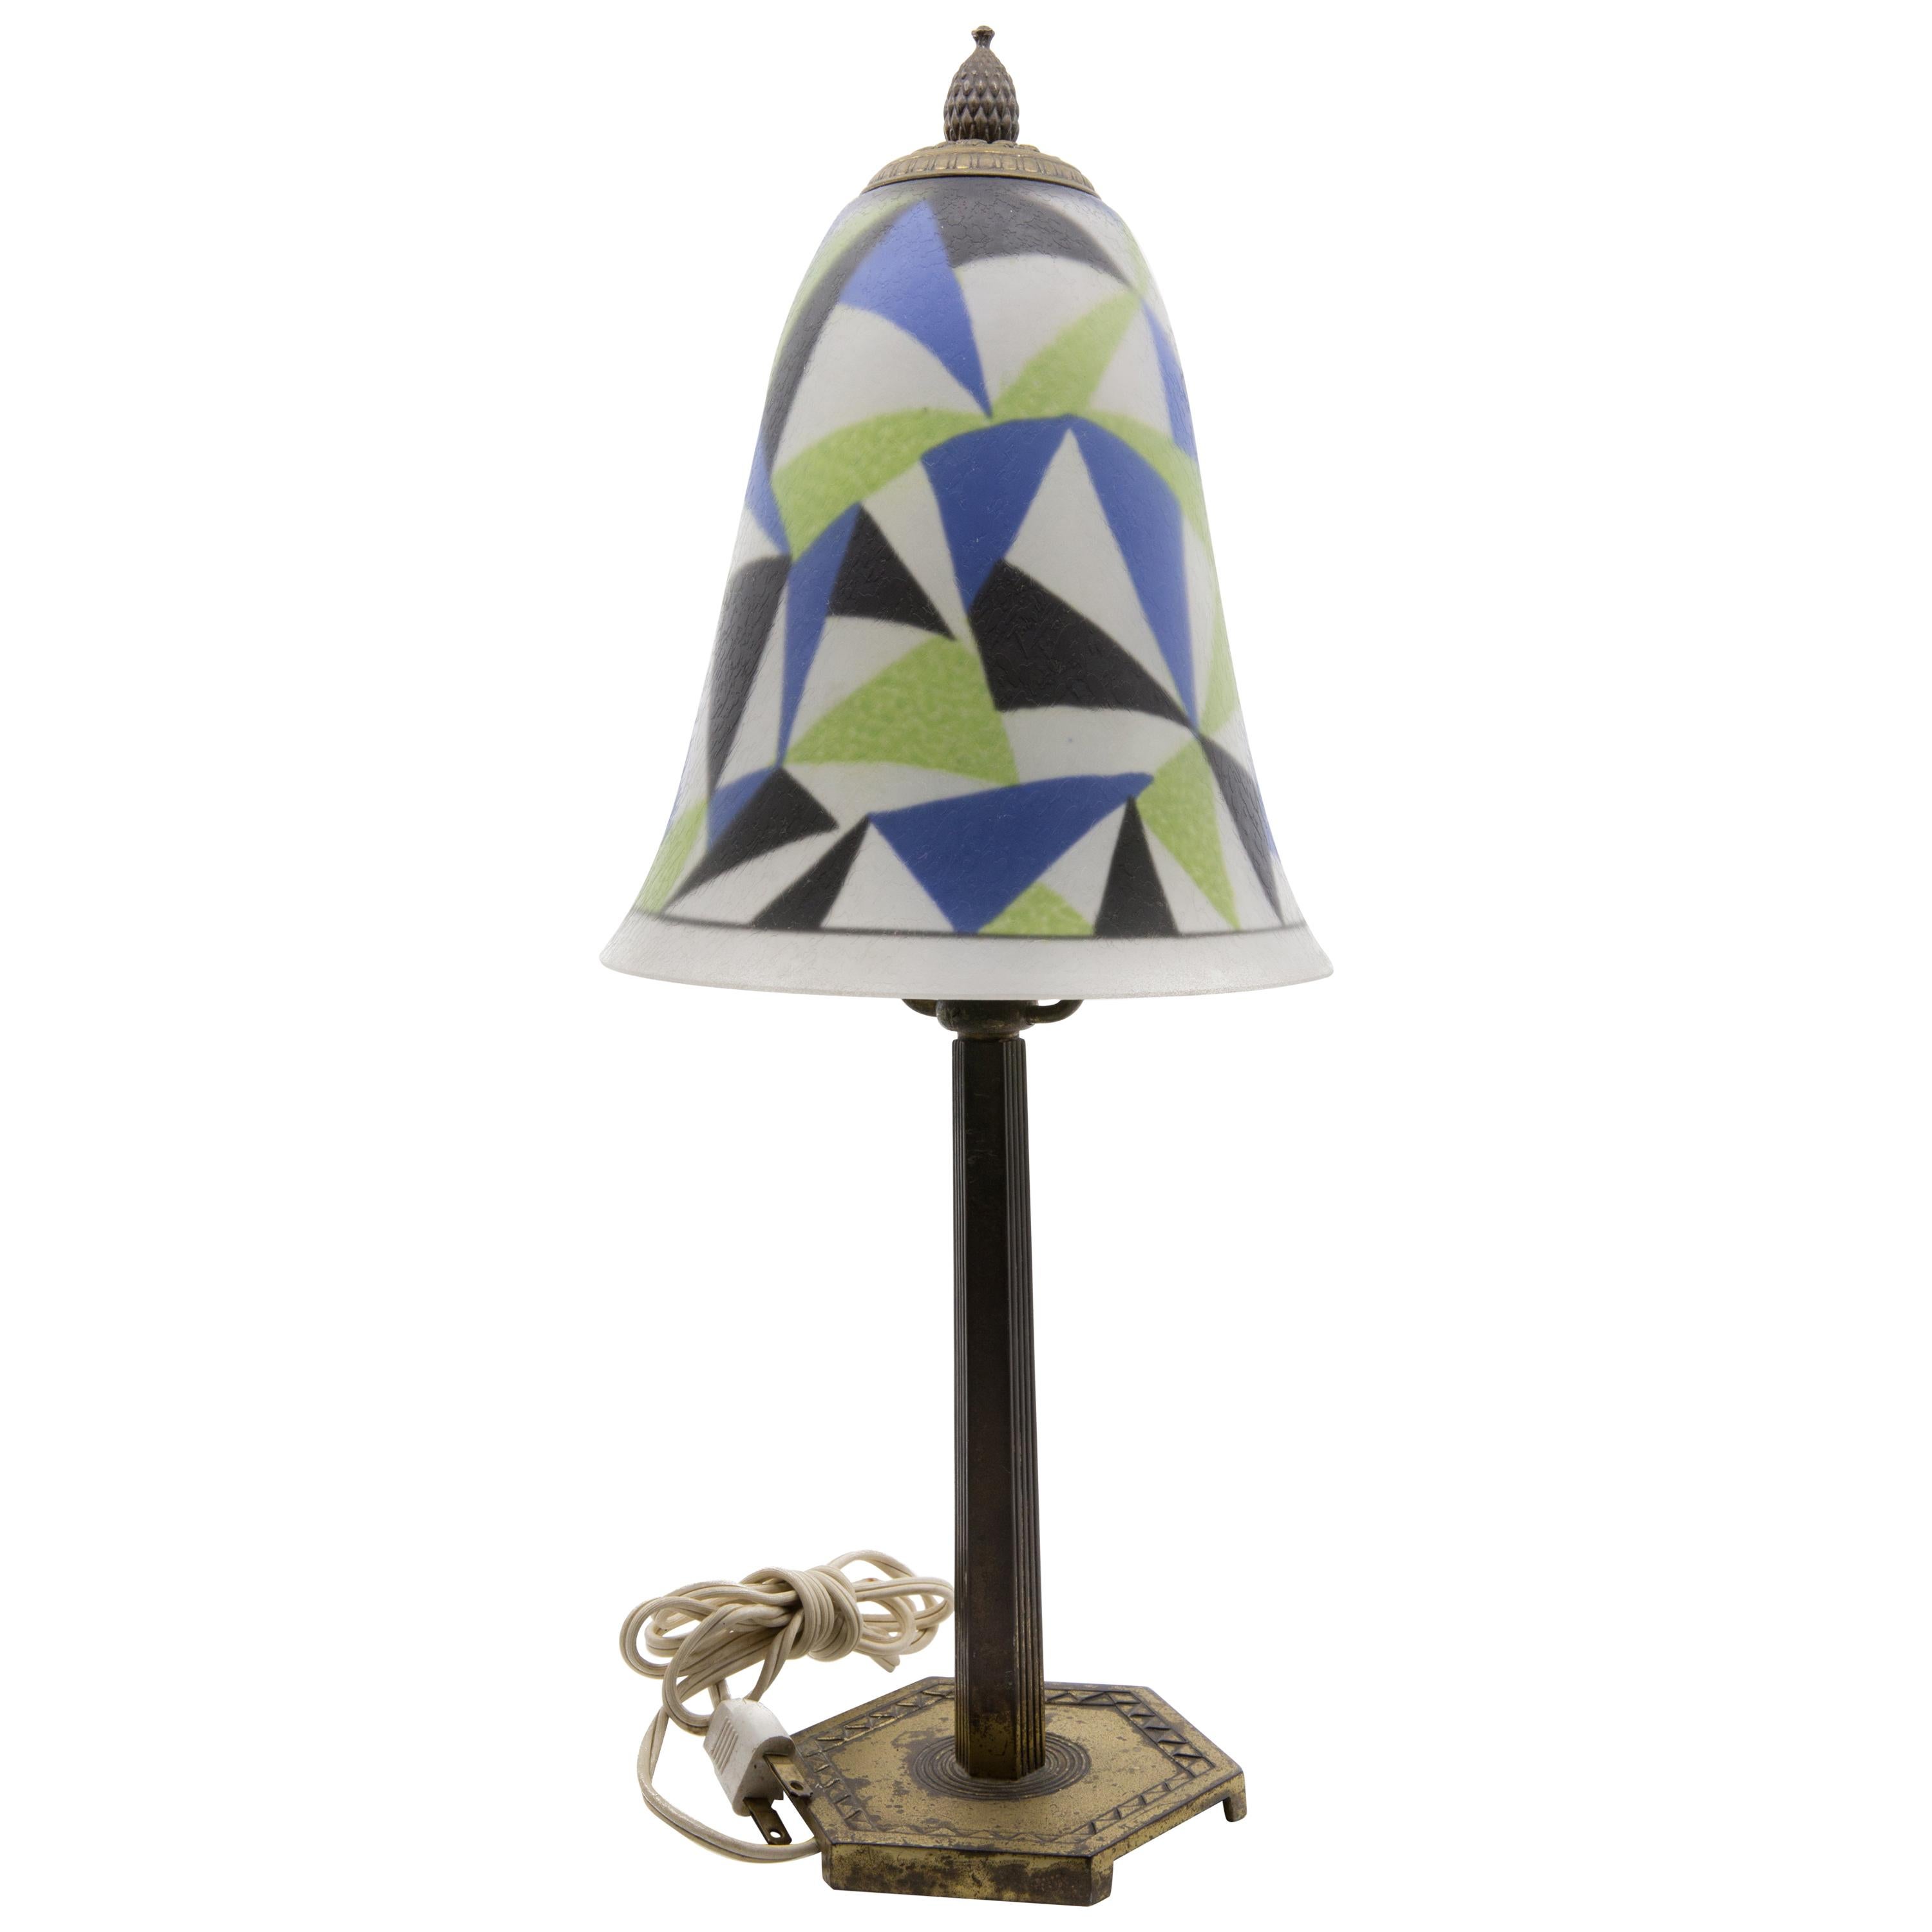 Pairpoint Art Deco Reverse Painted Signed Desk Lamp, circa 1925